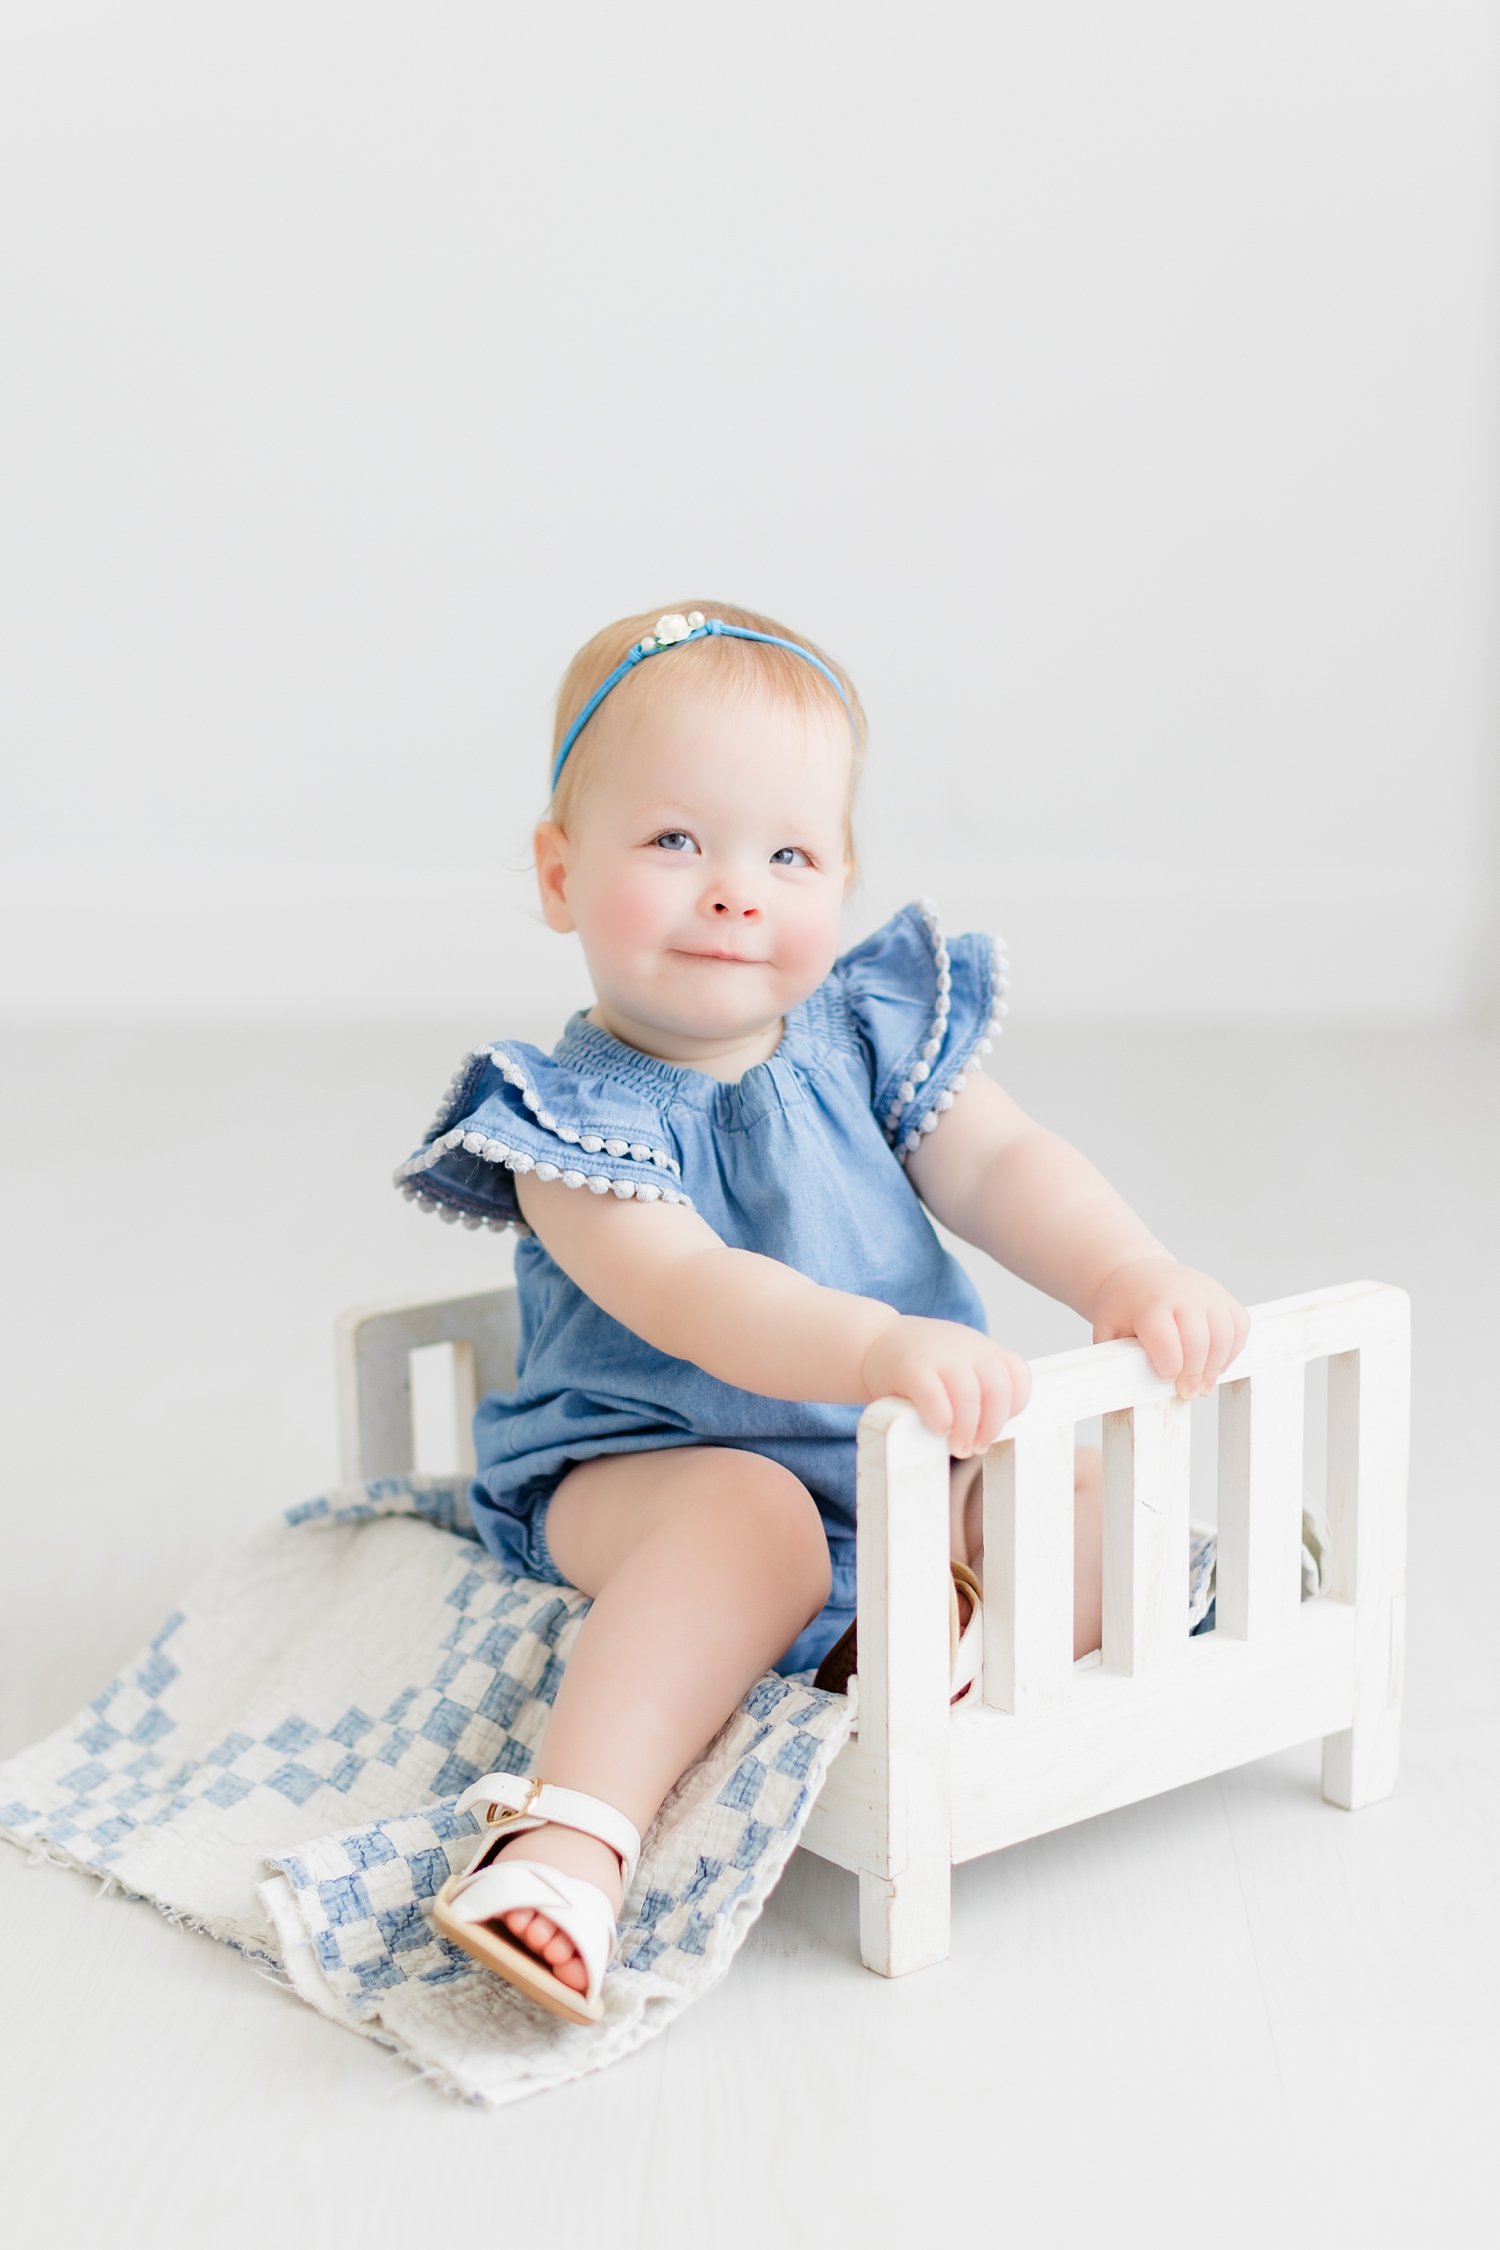 Baby Shae, wearing a denim blue colored romper sits in a white, wooden doll bed draped with a white and blue quilt | CB Studio